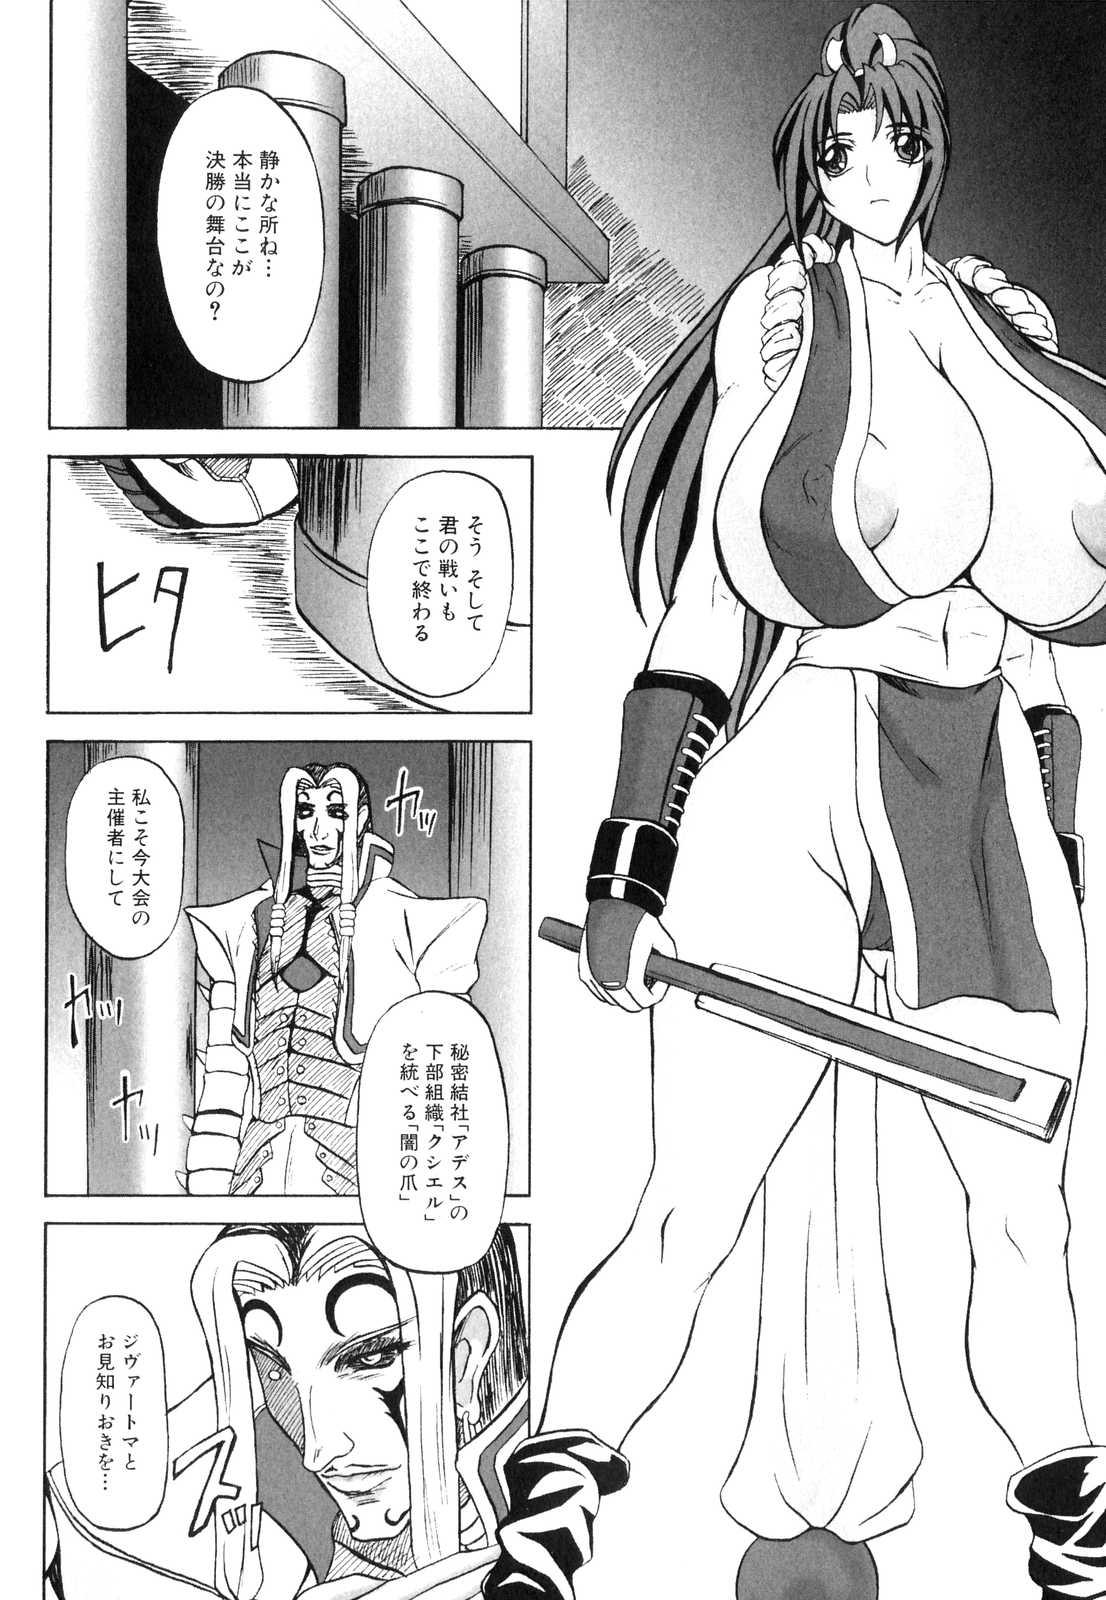 Asians Mars Impact - King of fighters Euro - Page 3